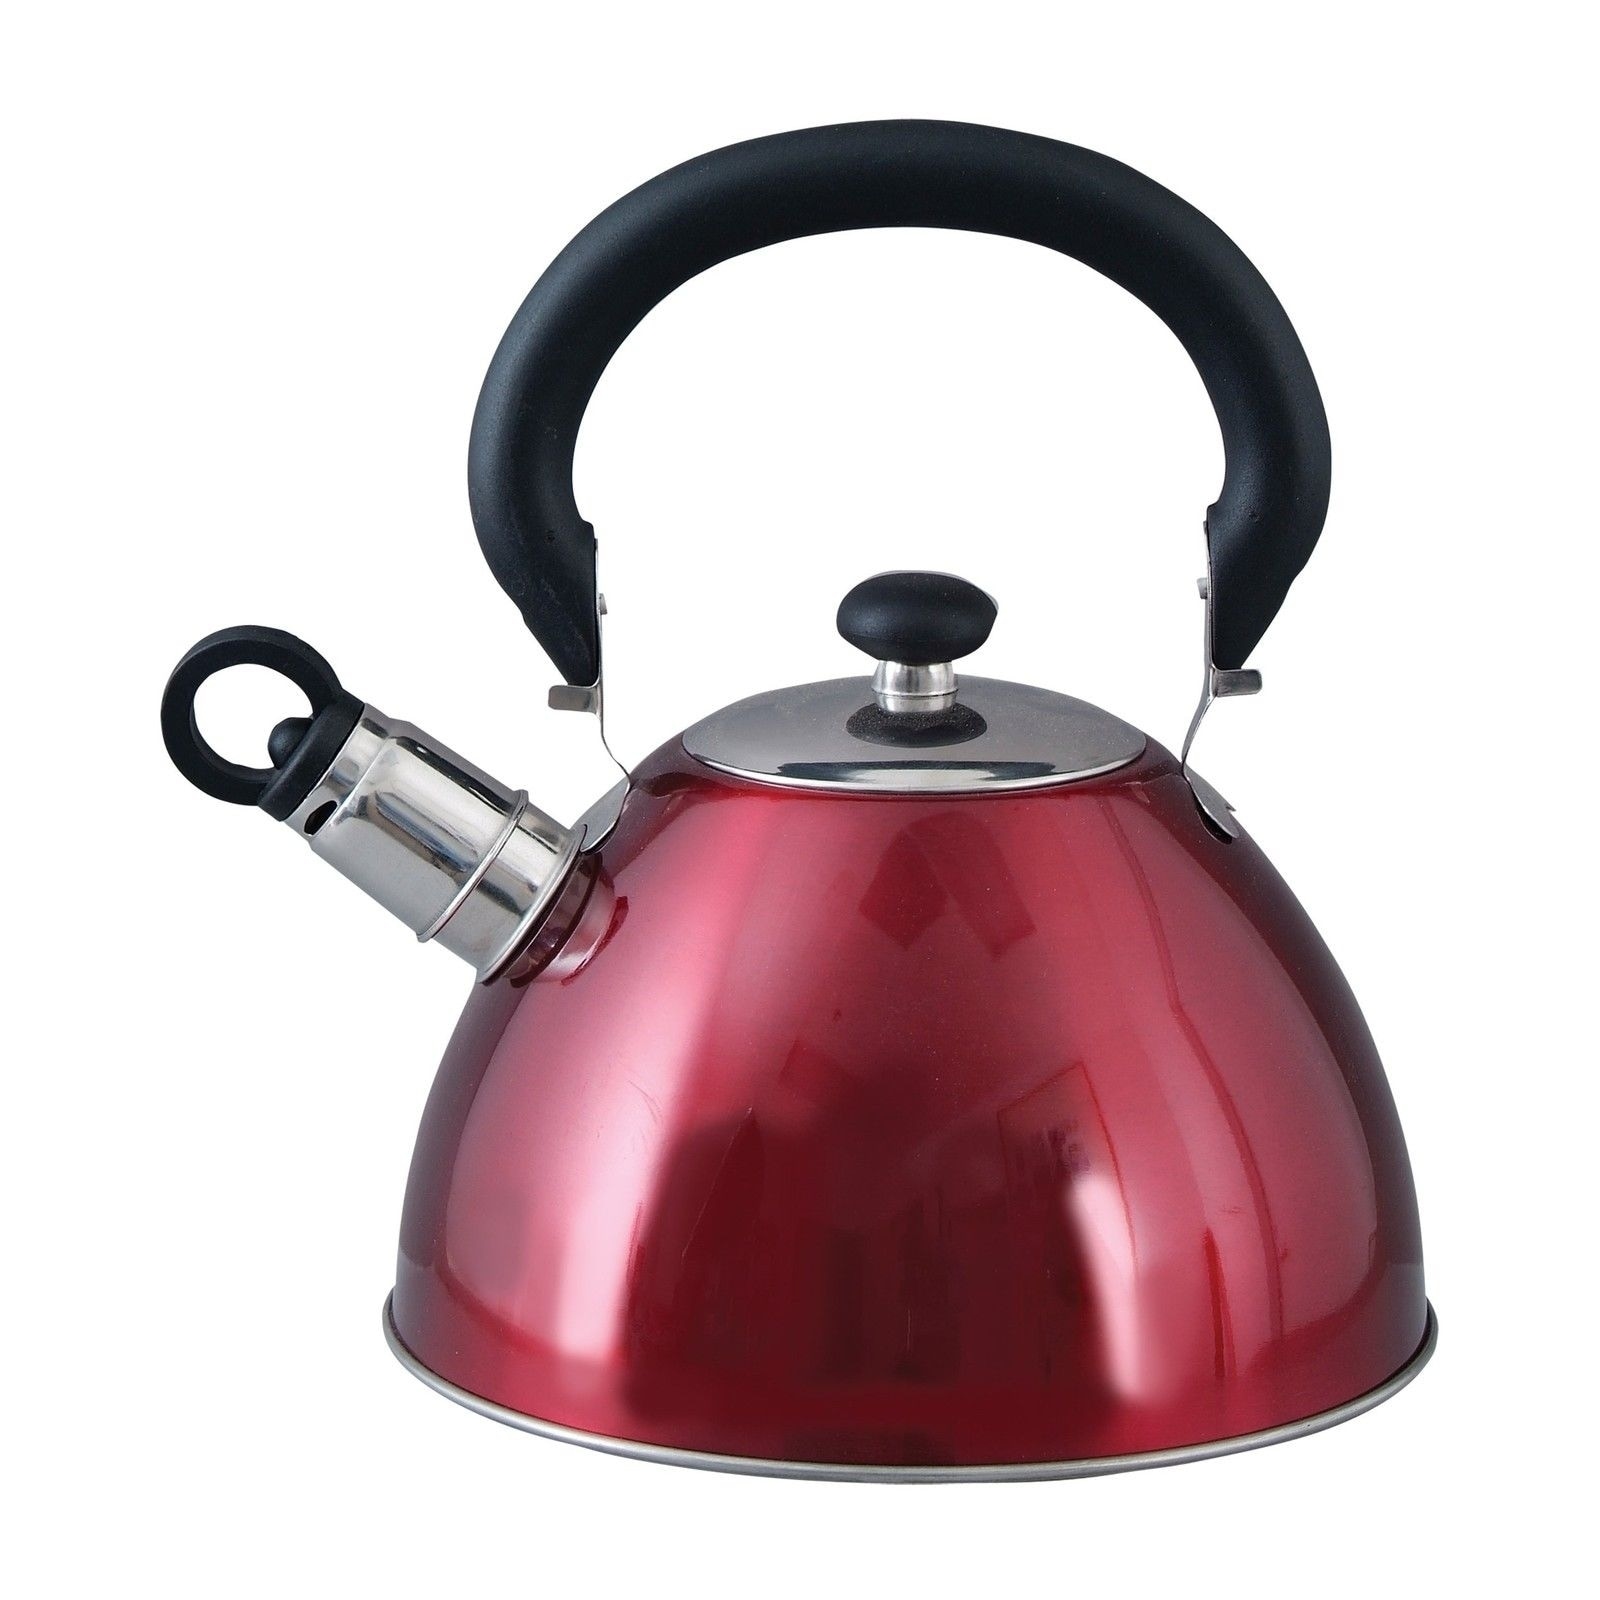 Mr Coffee Claredale Stainless Steel Whistling Tea Kettle,  2.2-Quart.Metallic Red